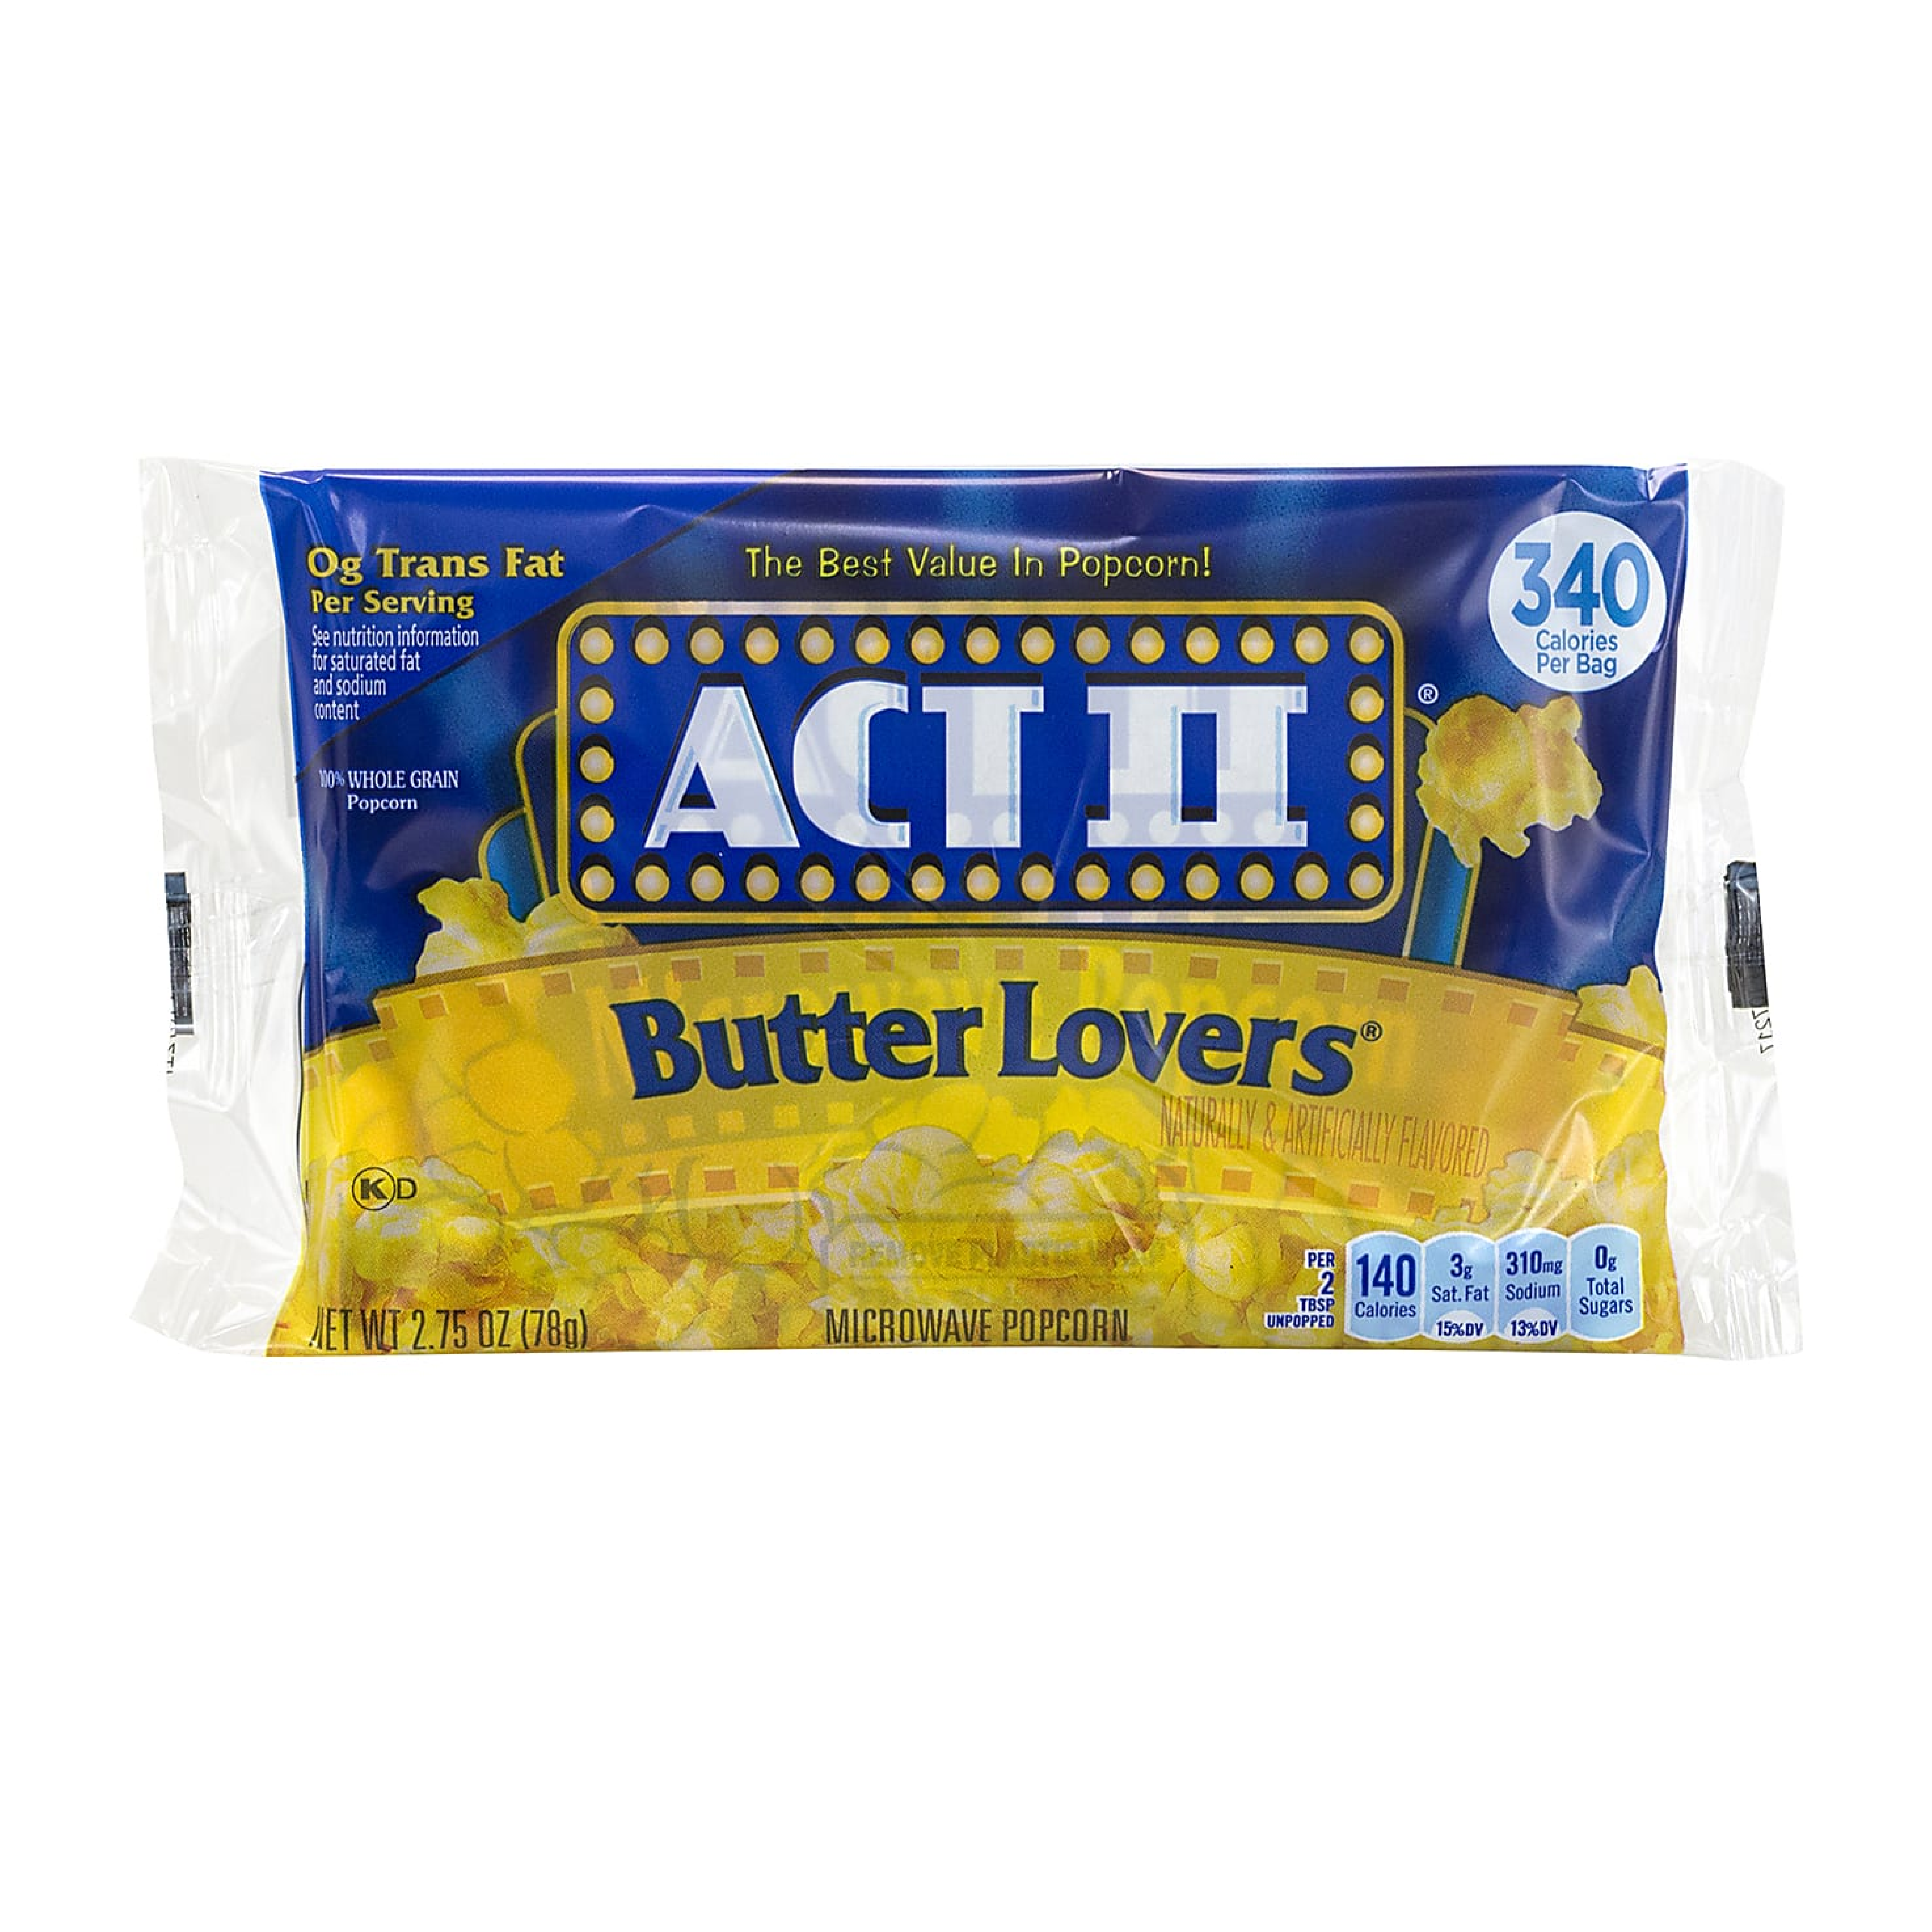 ACT II Butter Lovers Microwave Popcorn Bag 2.75oz